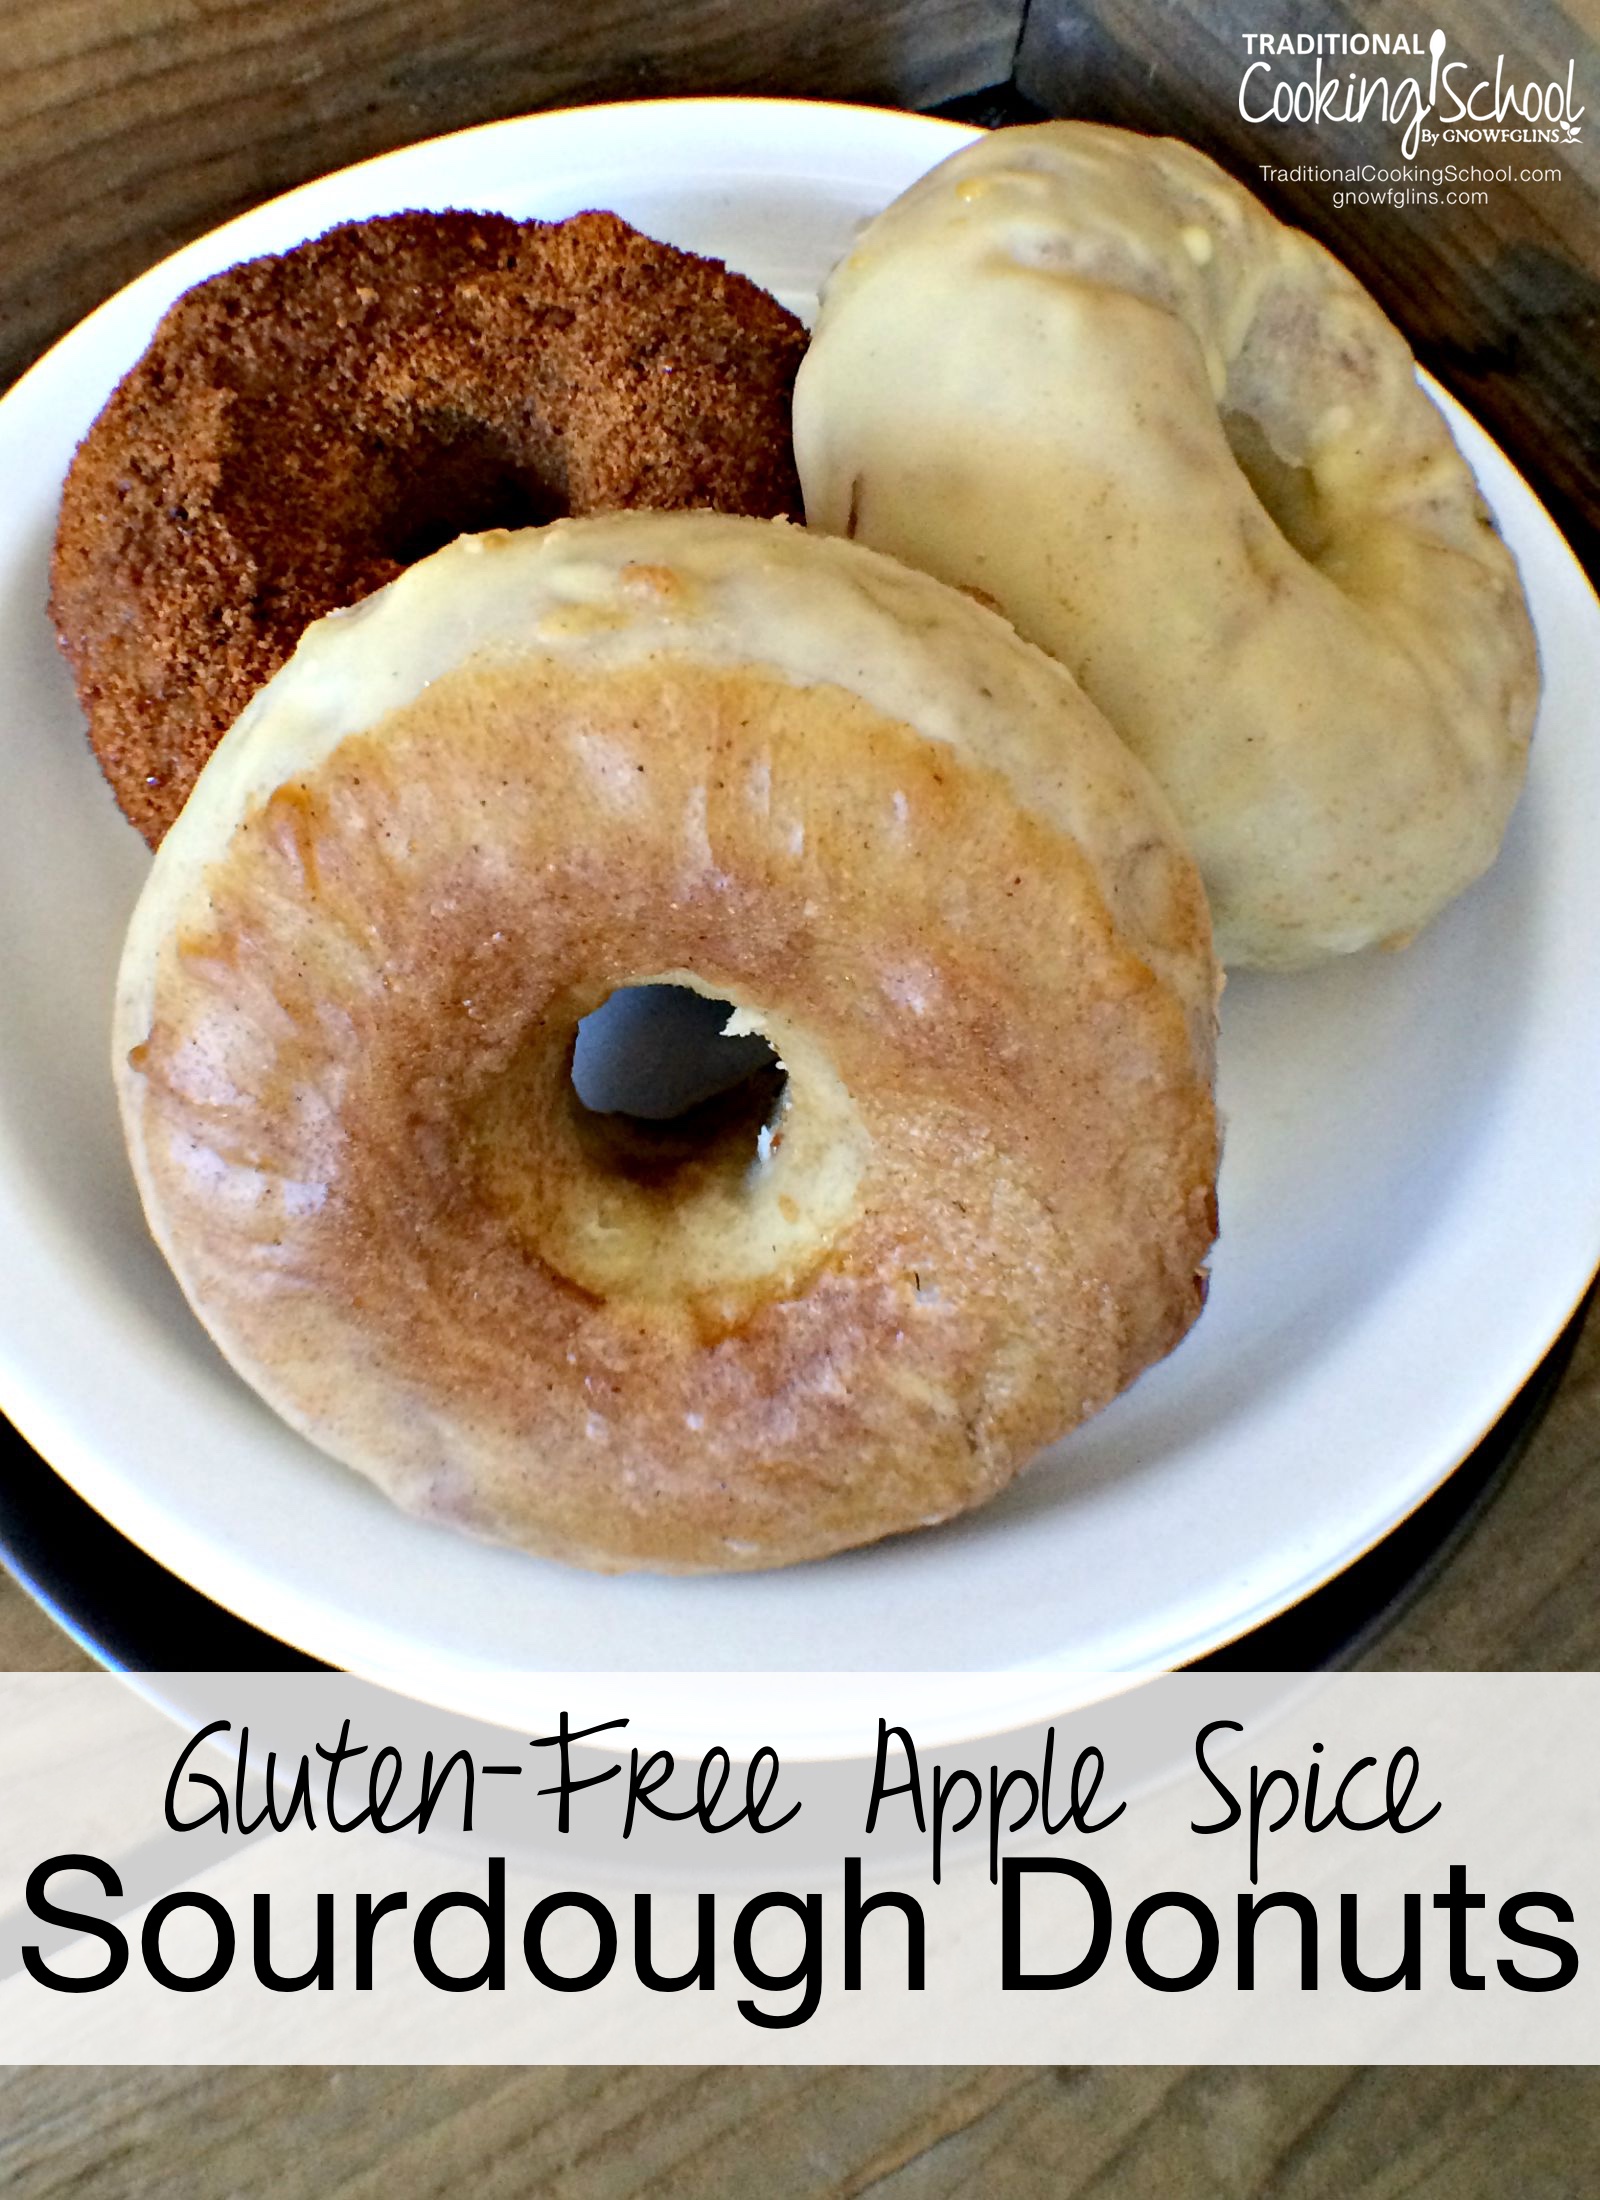 Gluten-Free Apple Spice Sourdough Donuts | Donuts... There's nothing like 'em! These sourdough gluten-free donuts without refined sweeteners raise the bar. They may just become a new staple! | TraditionalCookingSchool.com